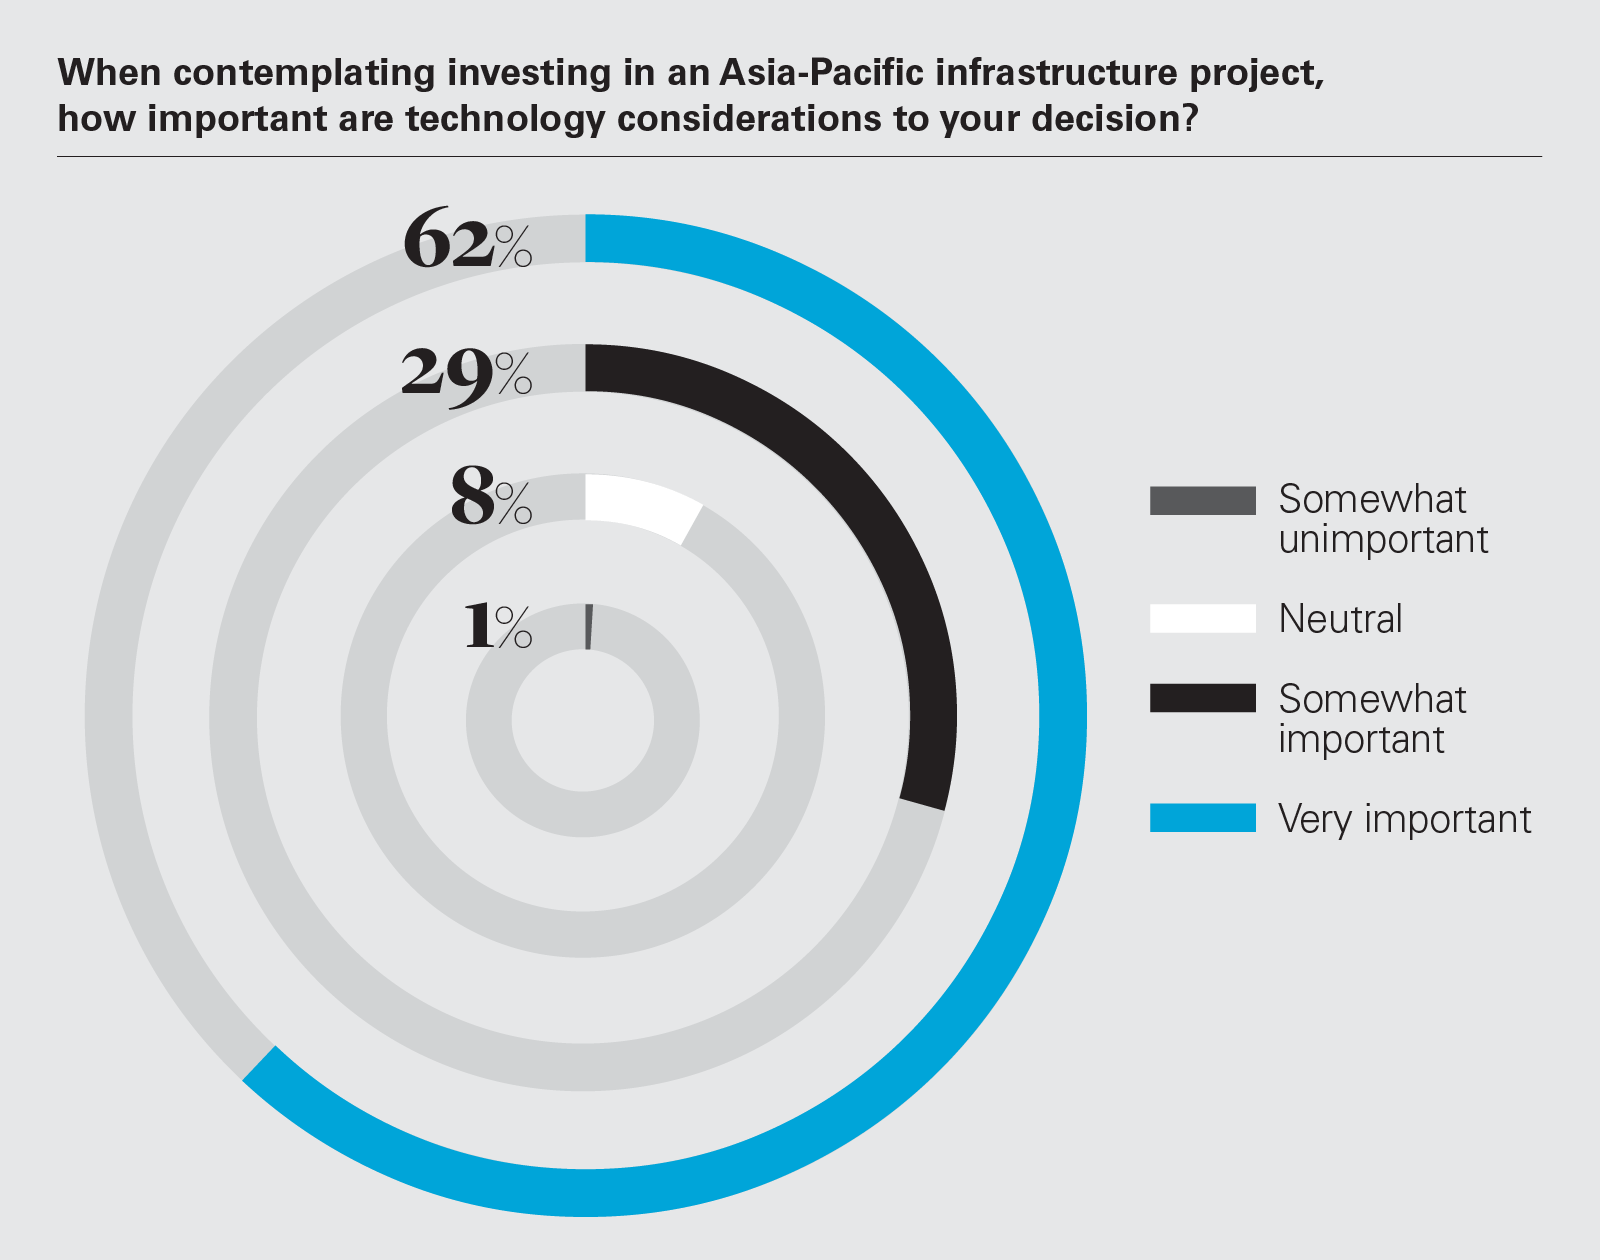 When contemplating investing in an Asia-Pacific infrastructure project, how important are technology considerations to your decision?